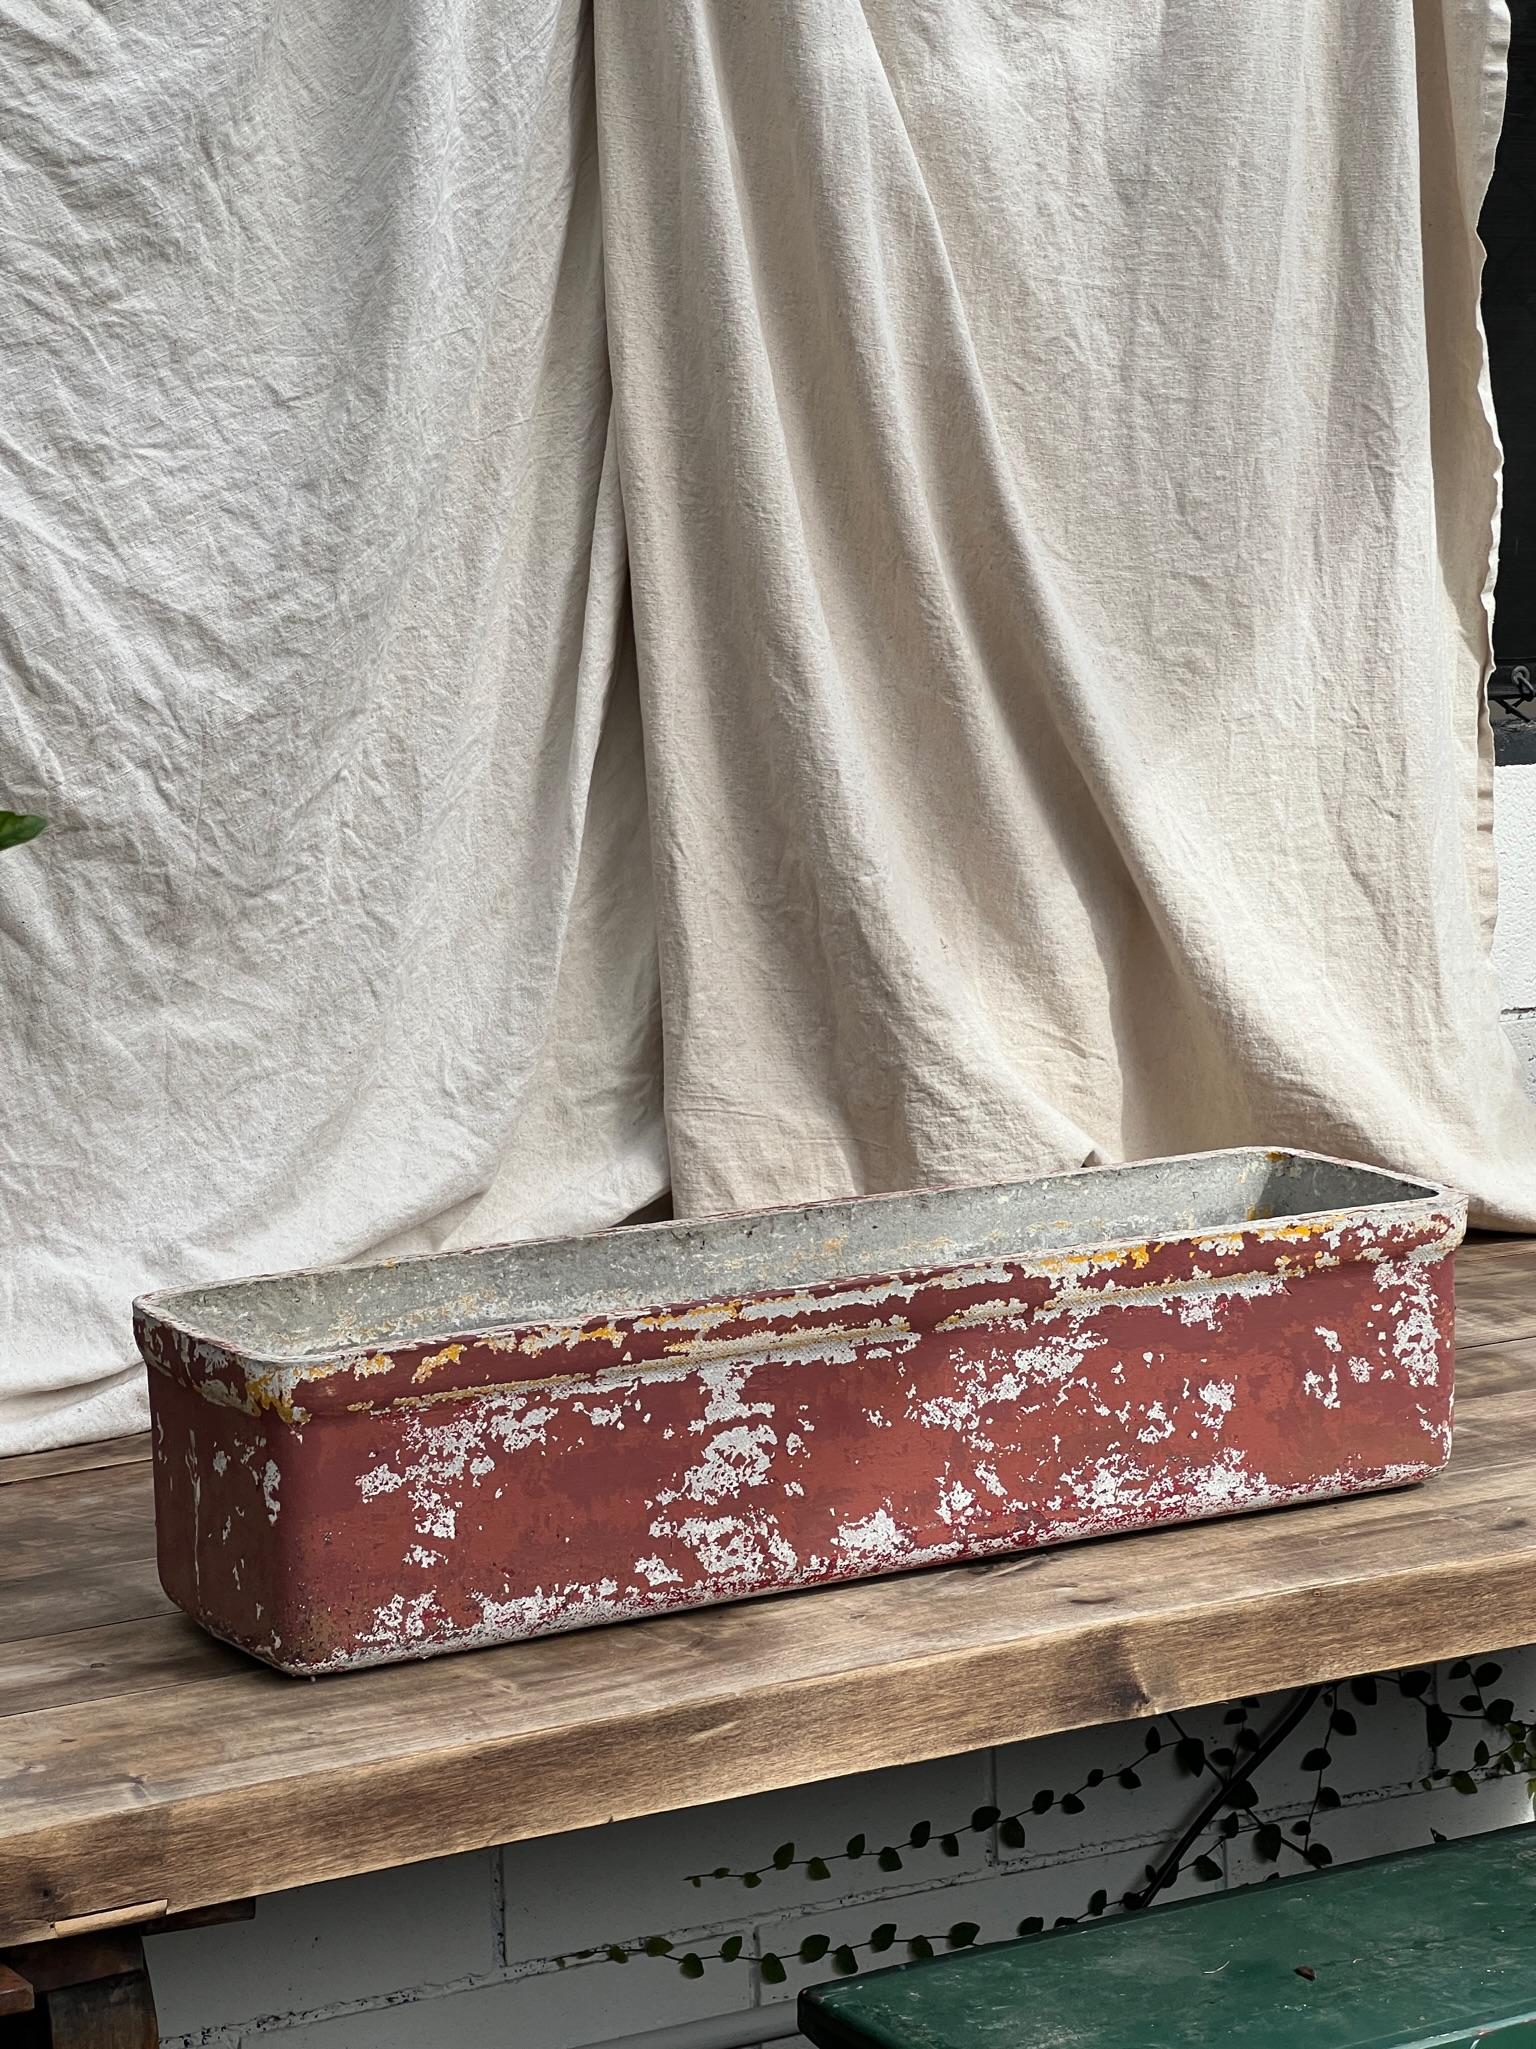 Crafted by willy guhl in switzerland during the 1960s, these rectangular concrete box planters exhibit a weathered rich red paint, adorned with a beautifully aged patina.

Measurements: 31